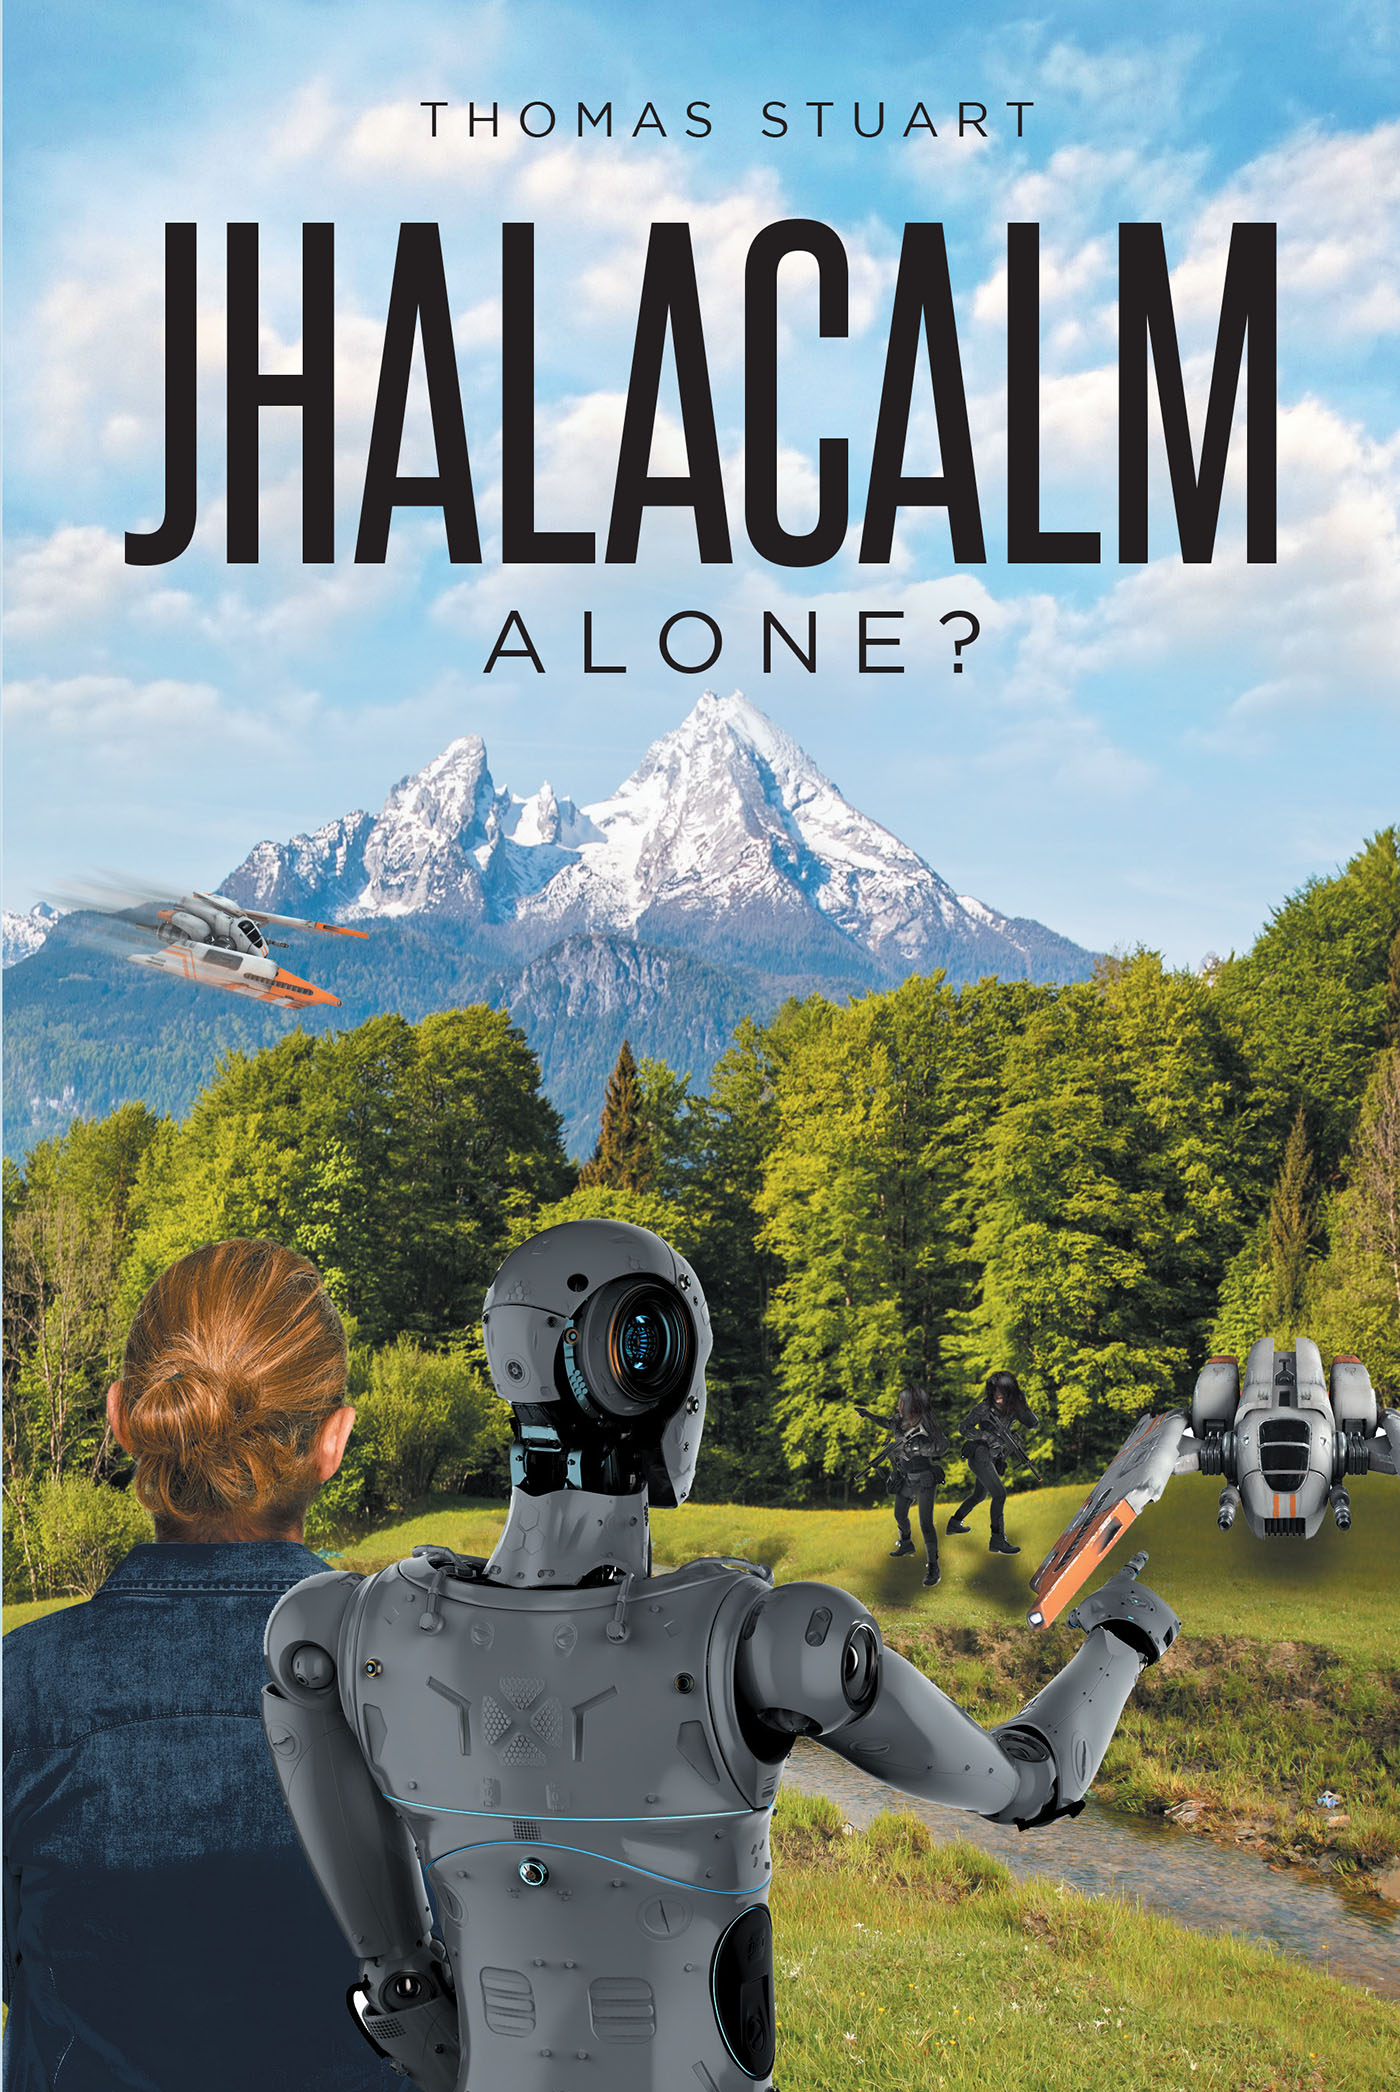 Author Thomas Stuart’s New Book, "Jhalacalm," Follows Col. MacDonald P. Cooper and His Adventures as He Builds a New Life on a Strange Alien Planet Far from Earth